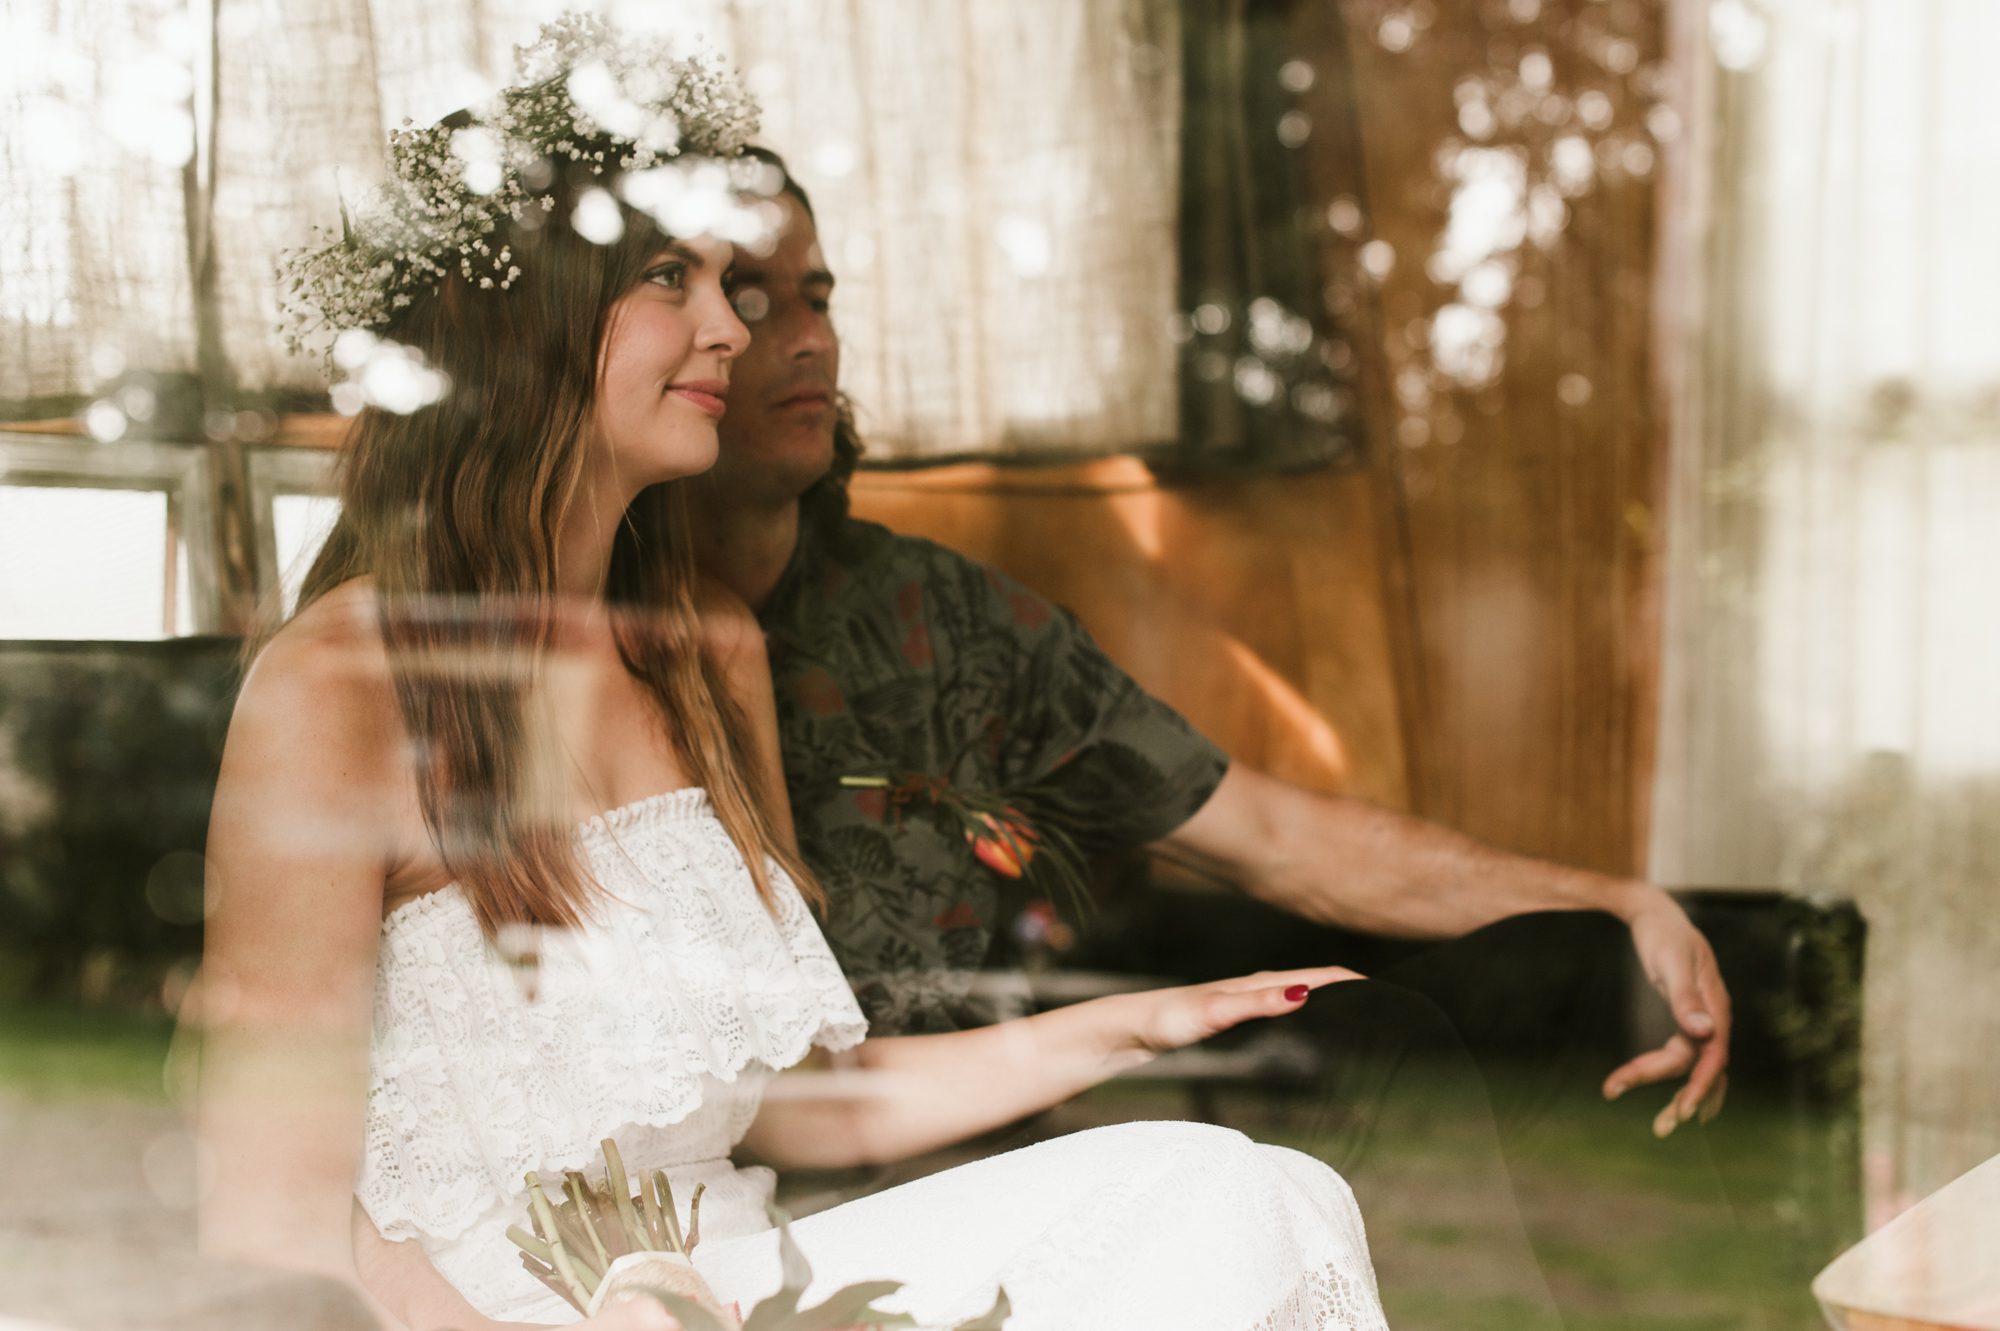 A portrait of the bride and groom with reflections surrounding them. By Long Beach, Washington wedding photographer Briana Morrison